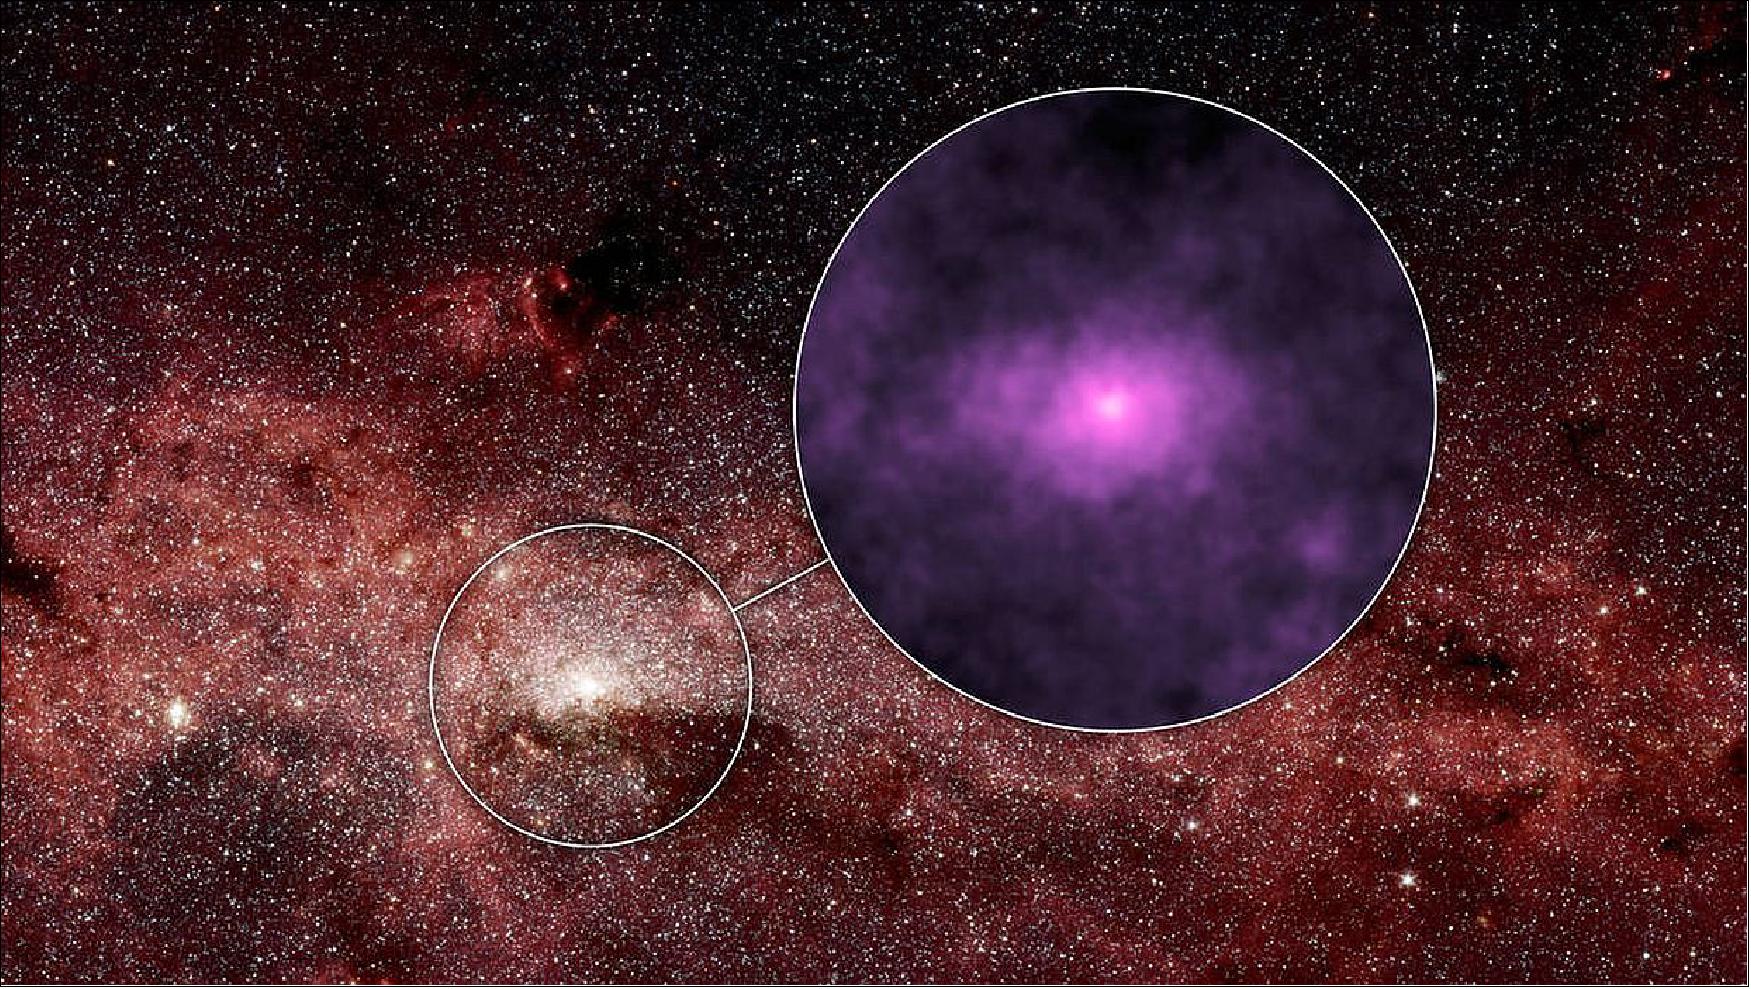 Figure 36: NuSTAR has captured a new high-energy X-ray view (magenta) of the bustling center of our Milky Way galaxy. The smaller circle shows the area where the NuSTAR image was taken -- the very center of our galaxy, where a giant black hole resides. That region is enlarged to the right, in the larger circle, to show the NuSTAR data (image credit: NASA/JPL, Caltech)